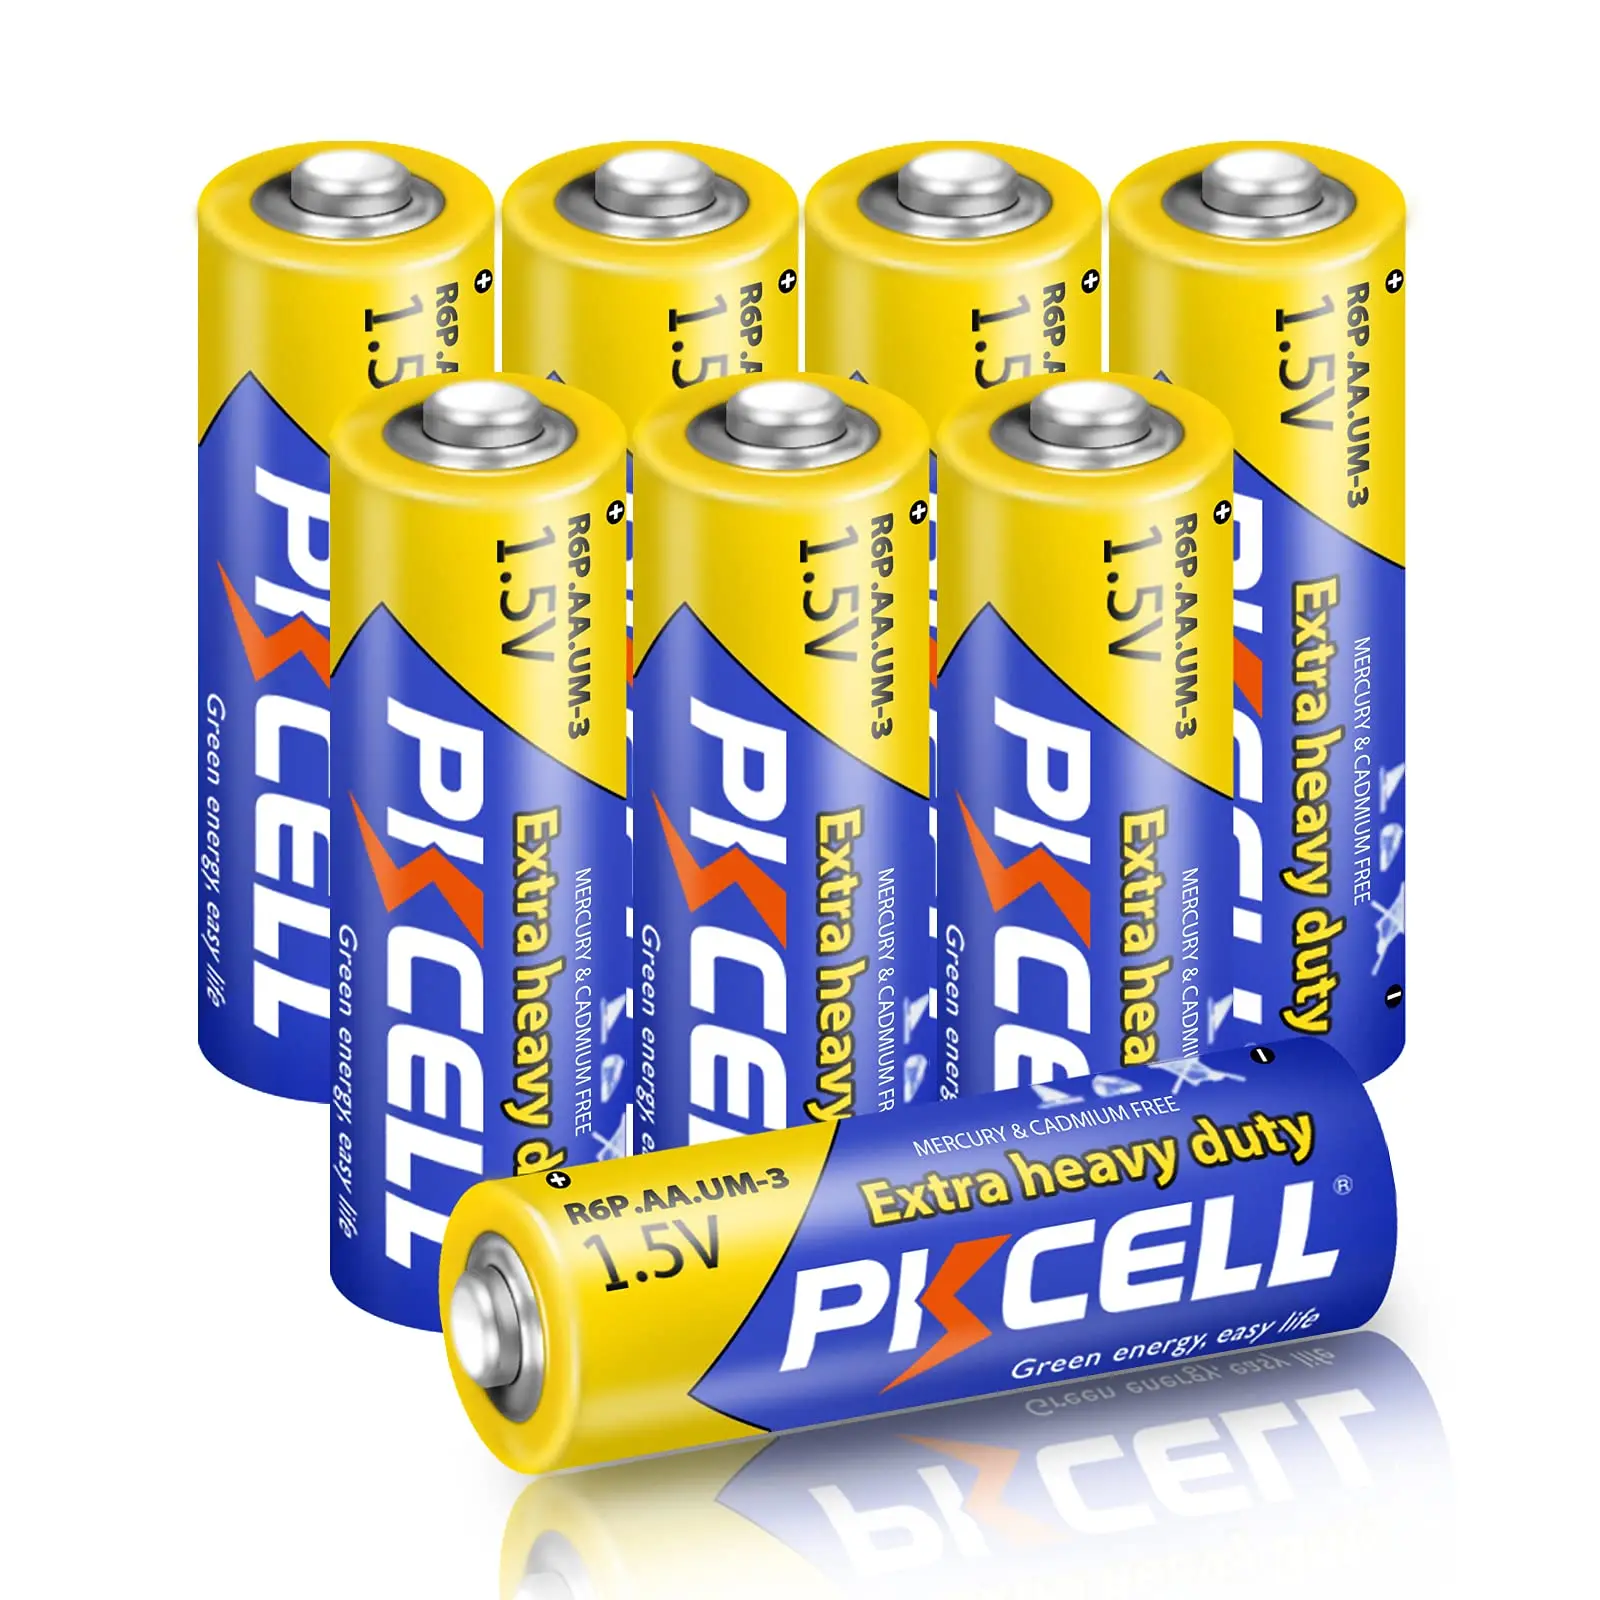 

PKCELL 1.5V AA R6P Battery Extra Heavy Duty Battery 8PCS 2A Size Carbon-Zinc Primary Batteries for Digital Thermometer Shavers